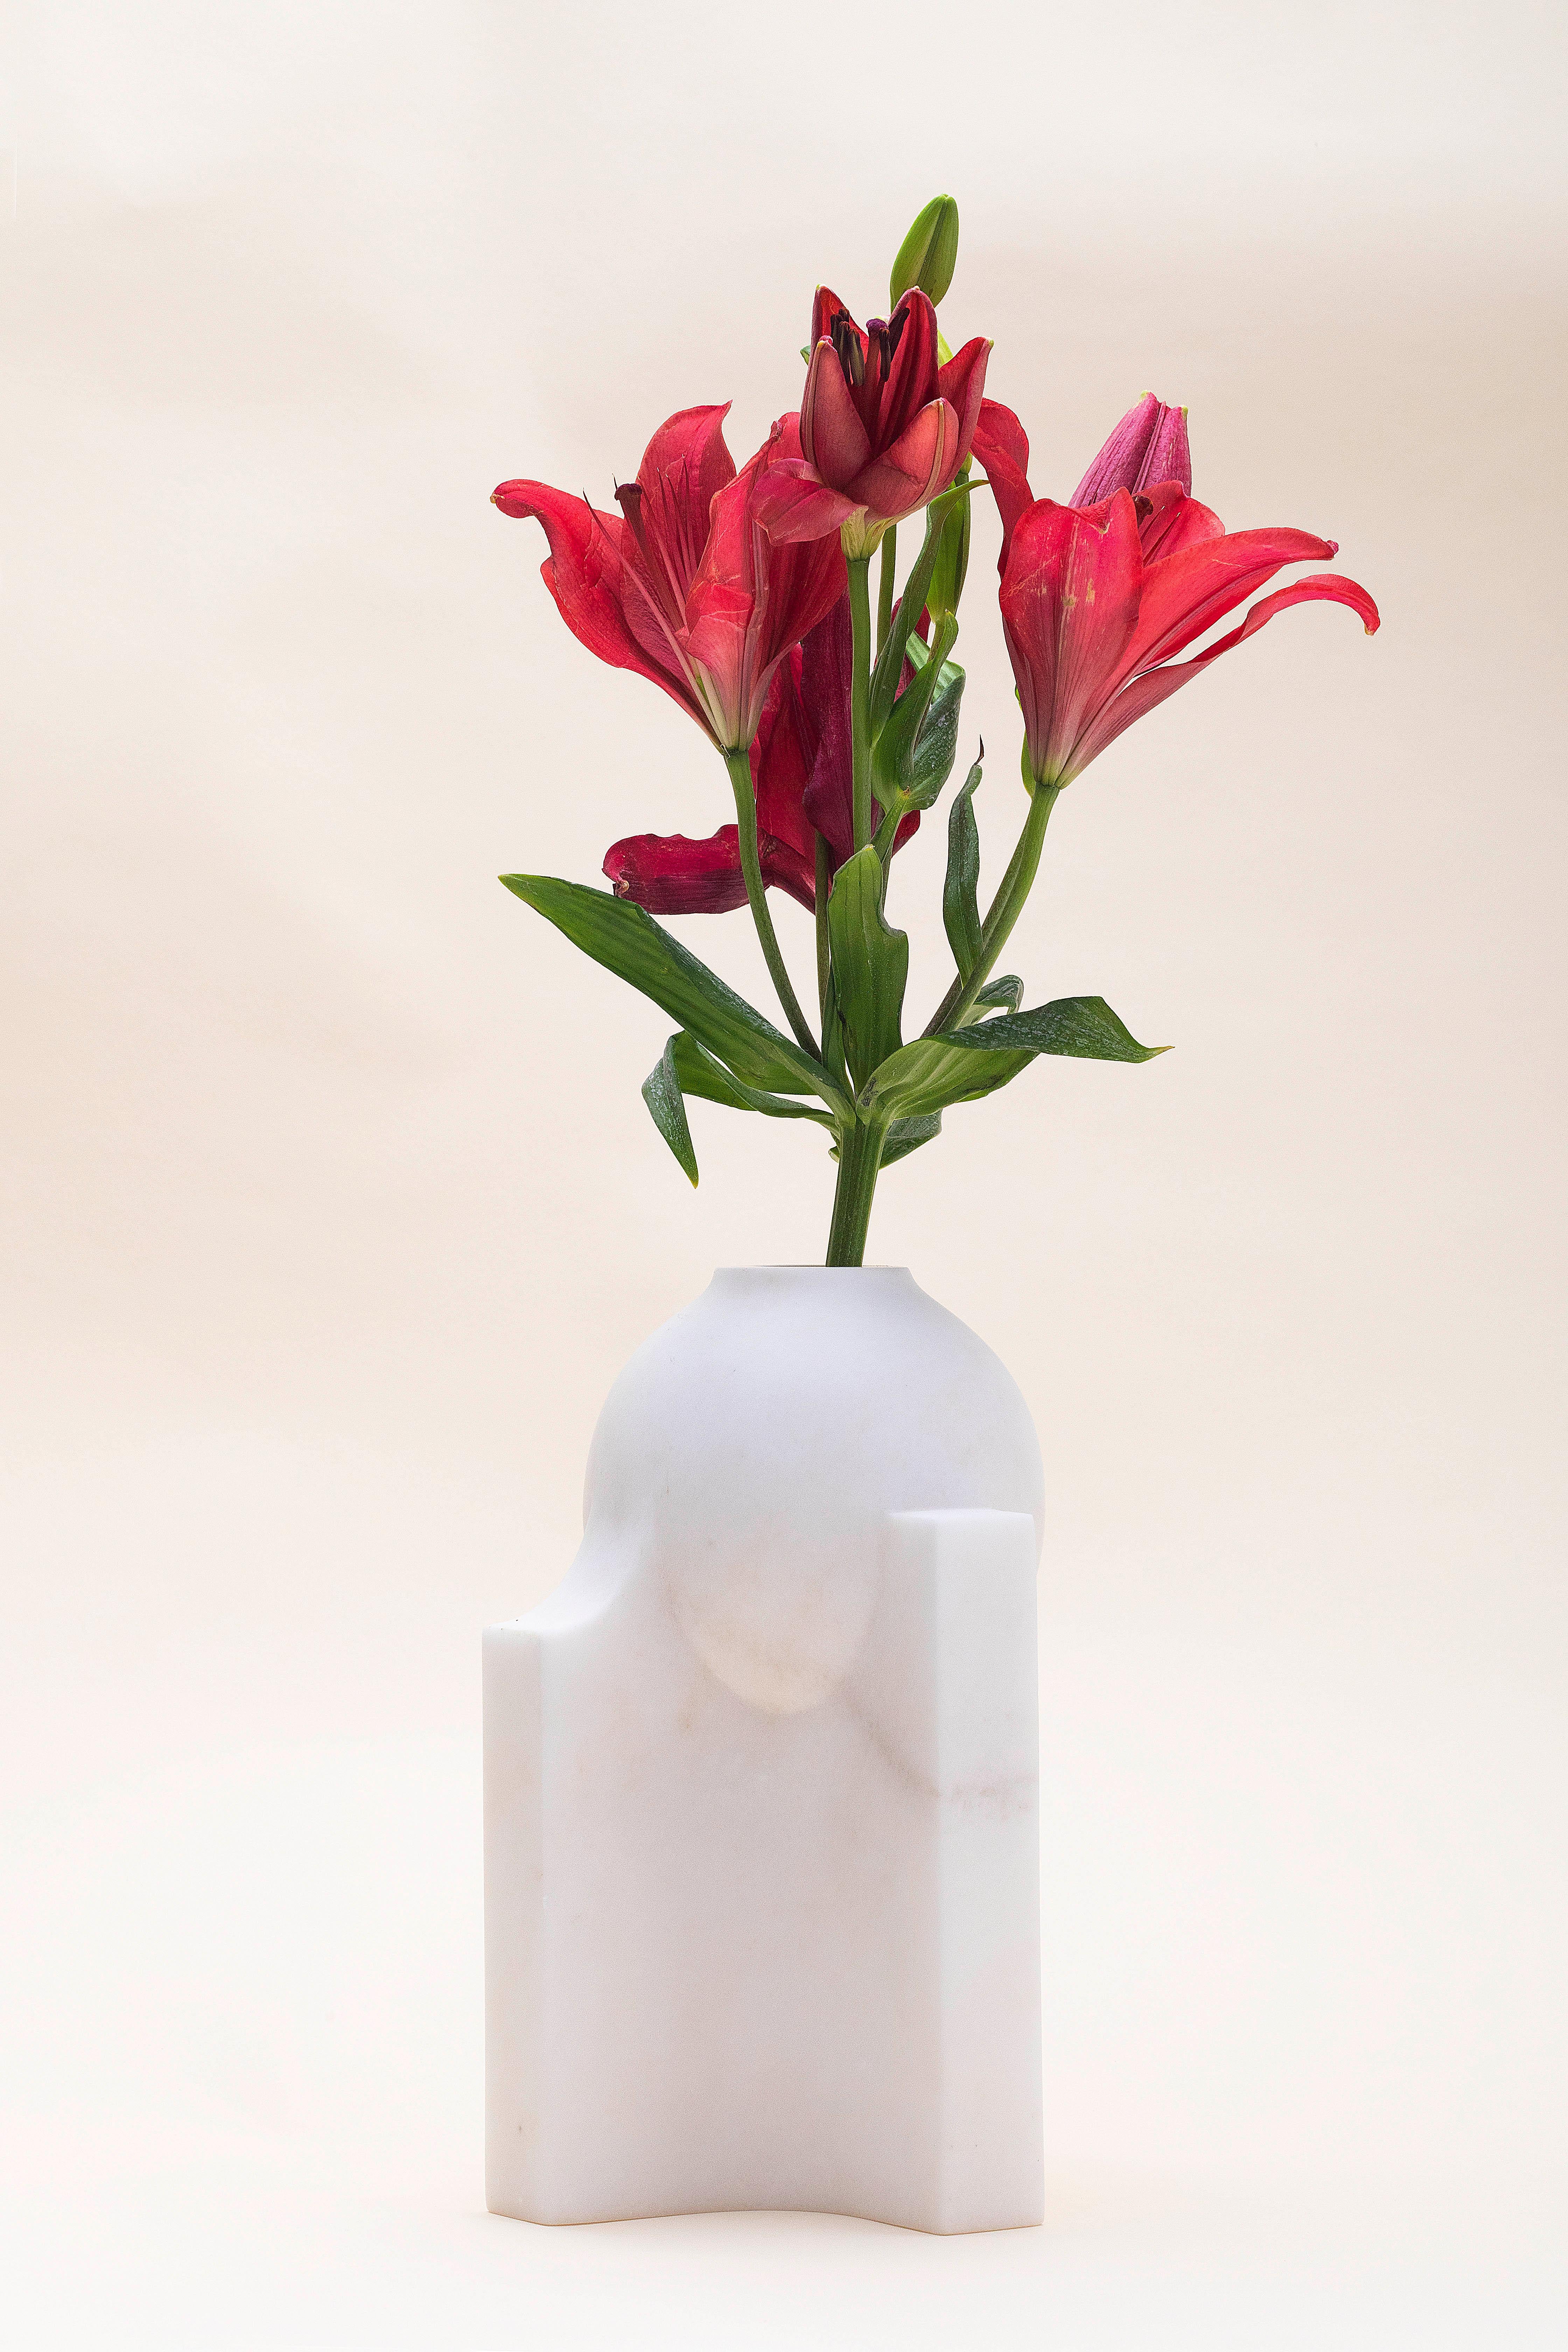 Contemporary Florero Bola Galeana Vase by Jorge Diego Etienne For Sale